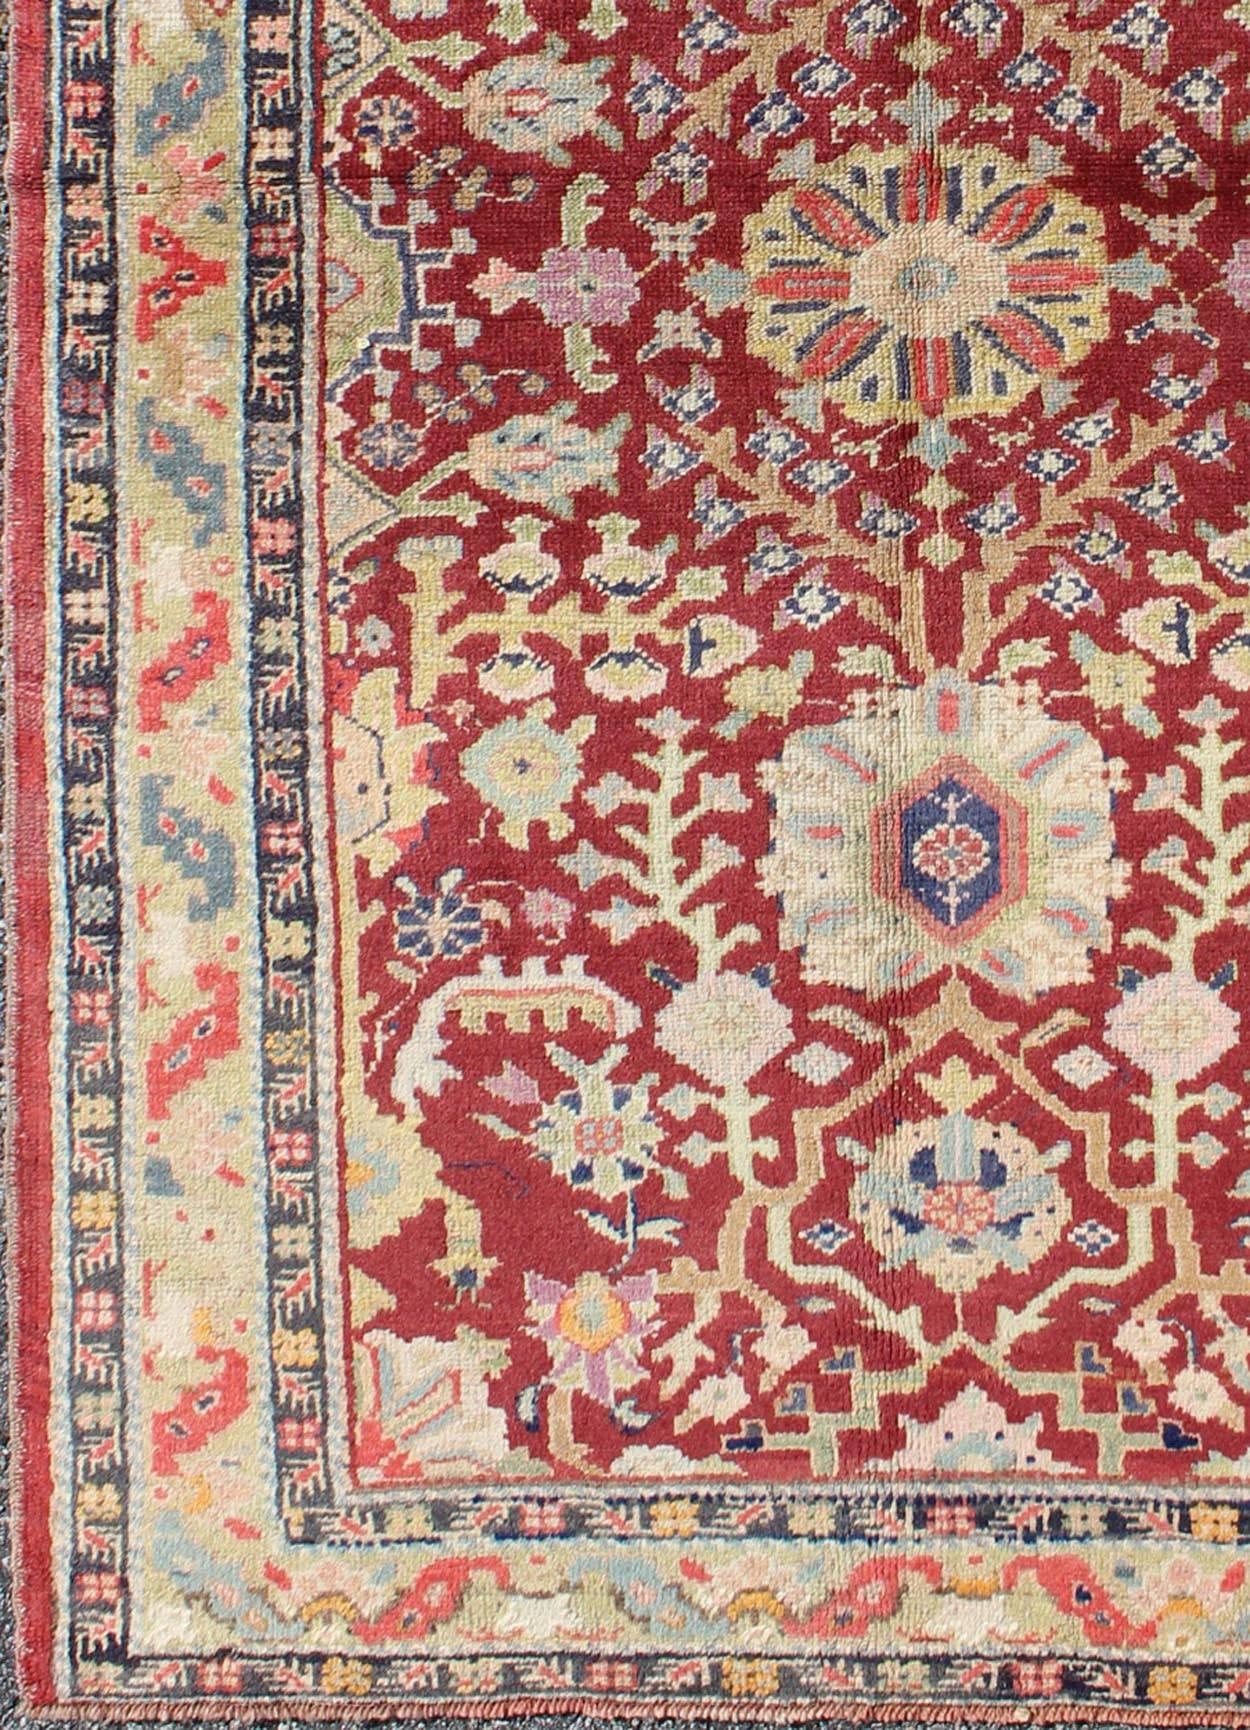 Oushak Carpet with Scattered Vines and Flowers on a Red Field
rug/en-141107  origin/ turkey

Handwoven in Turkey, this antique Oushak rug features scattered and repeating vines and floral medallions in the central field, which are brought to life on